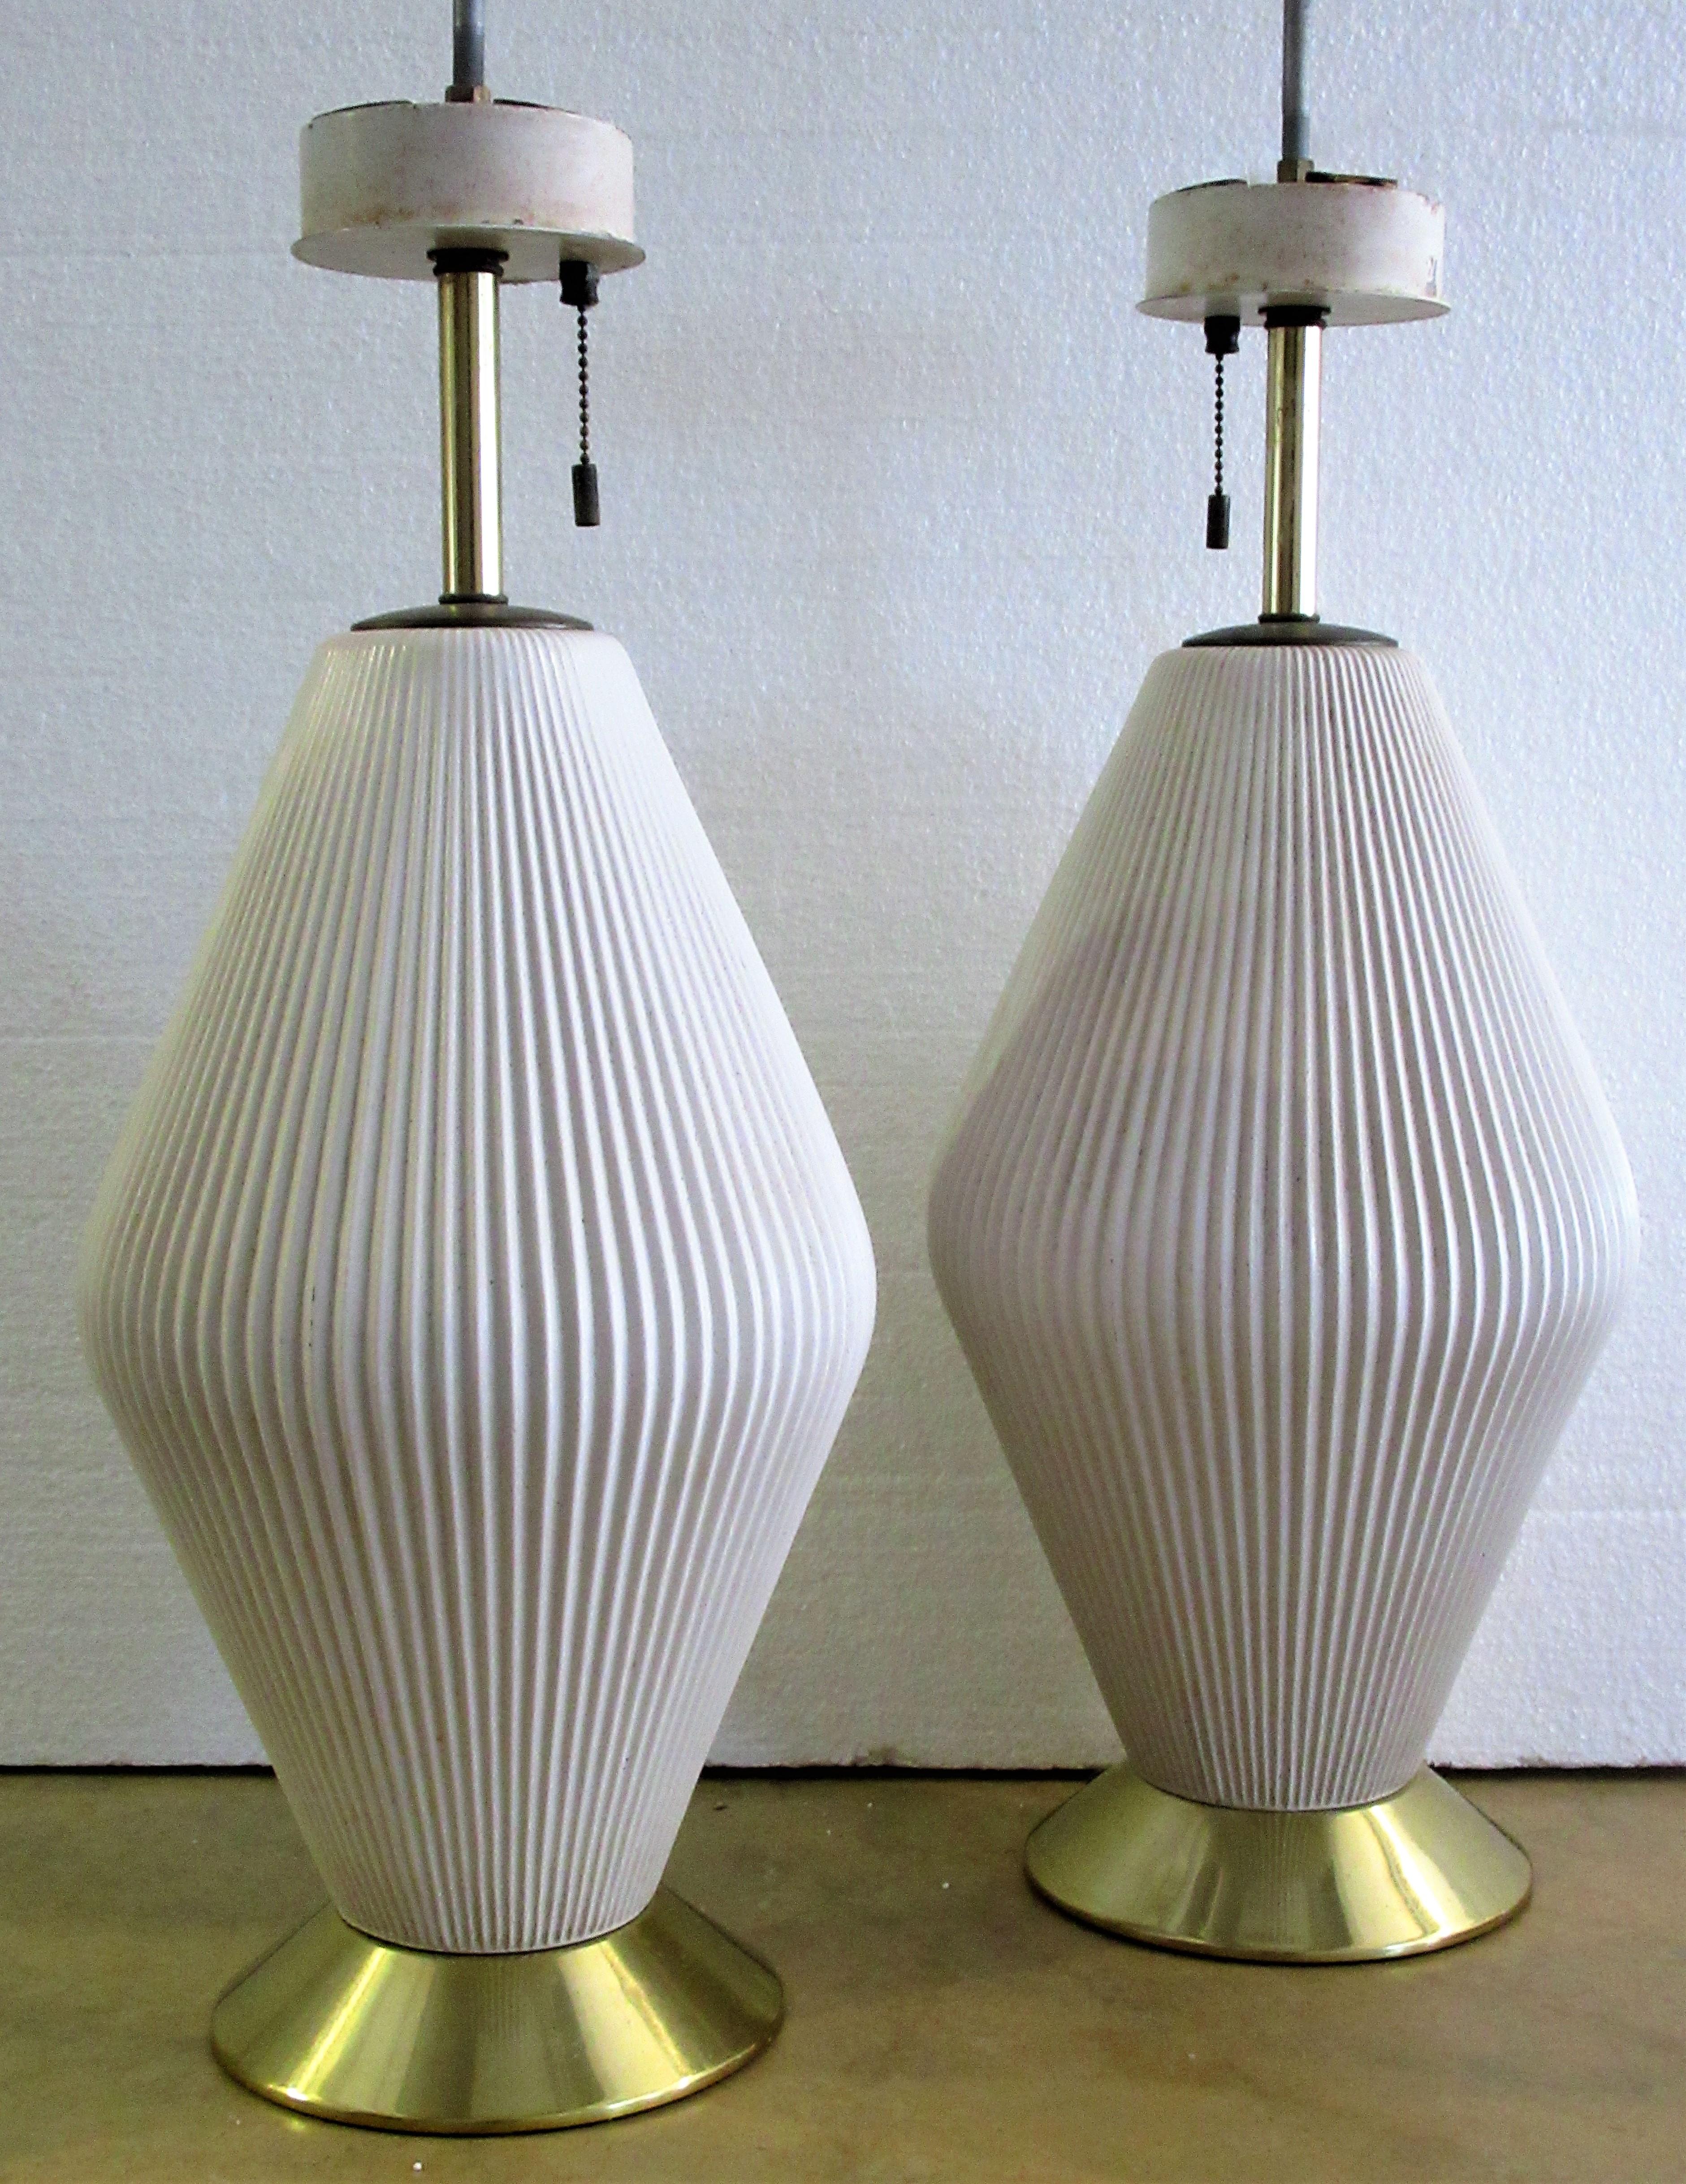 American Fluted Porcelain Table Lamps by Gerald Thurston for Lightolier